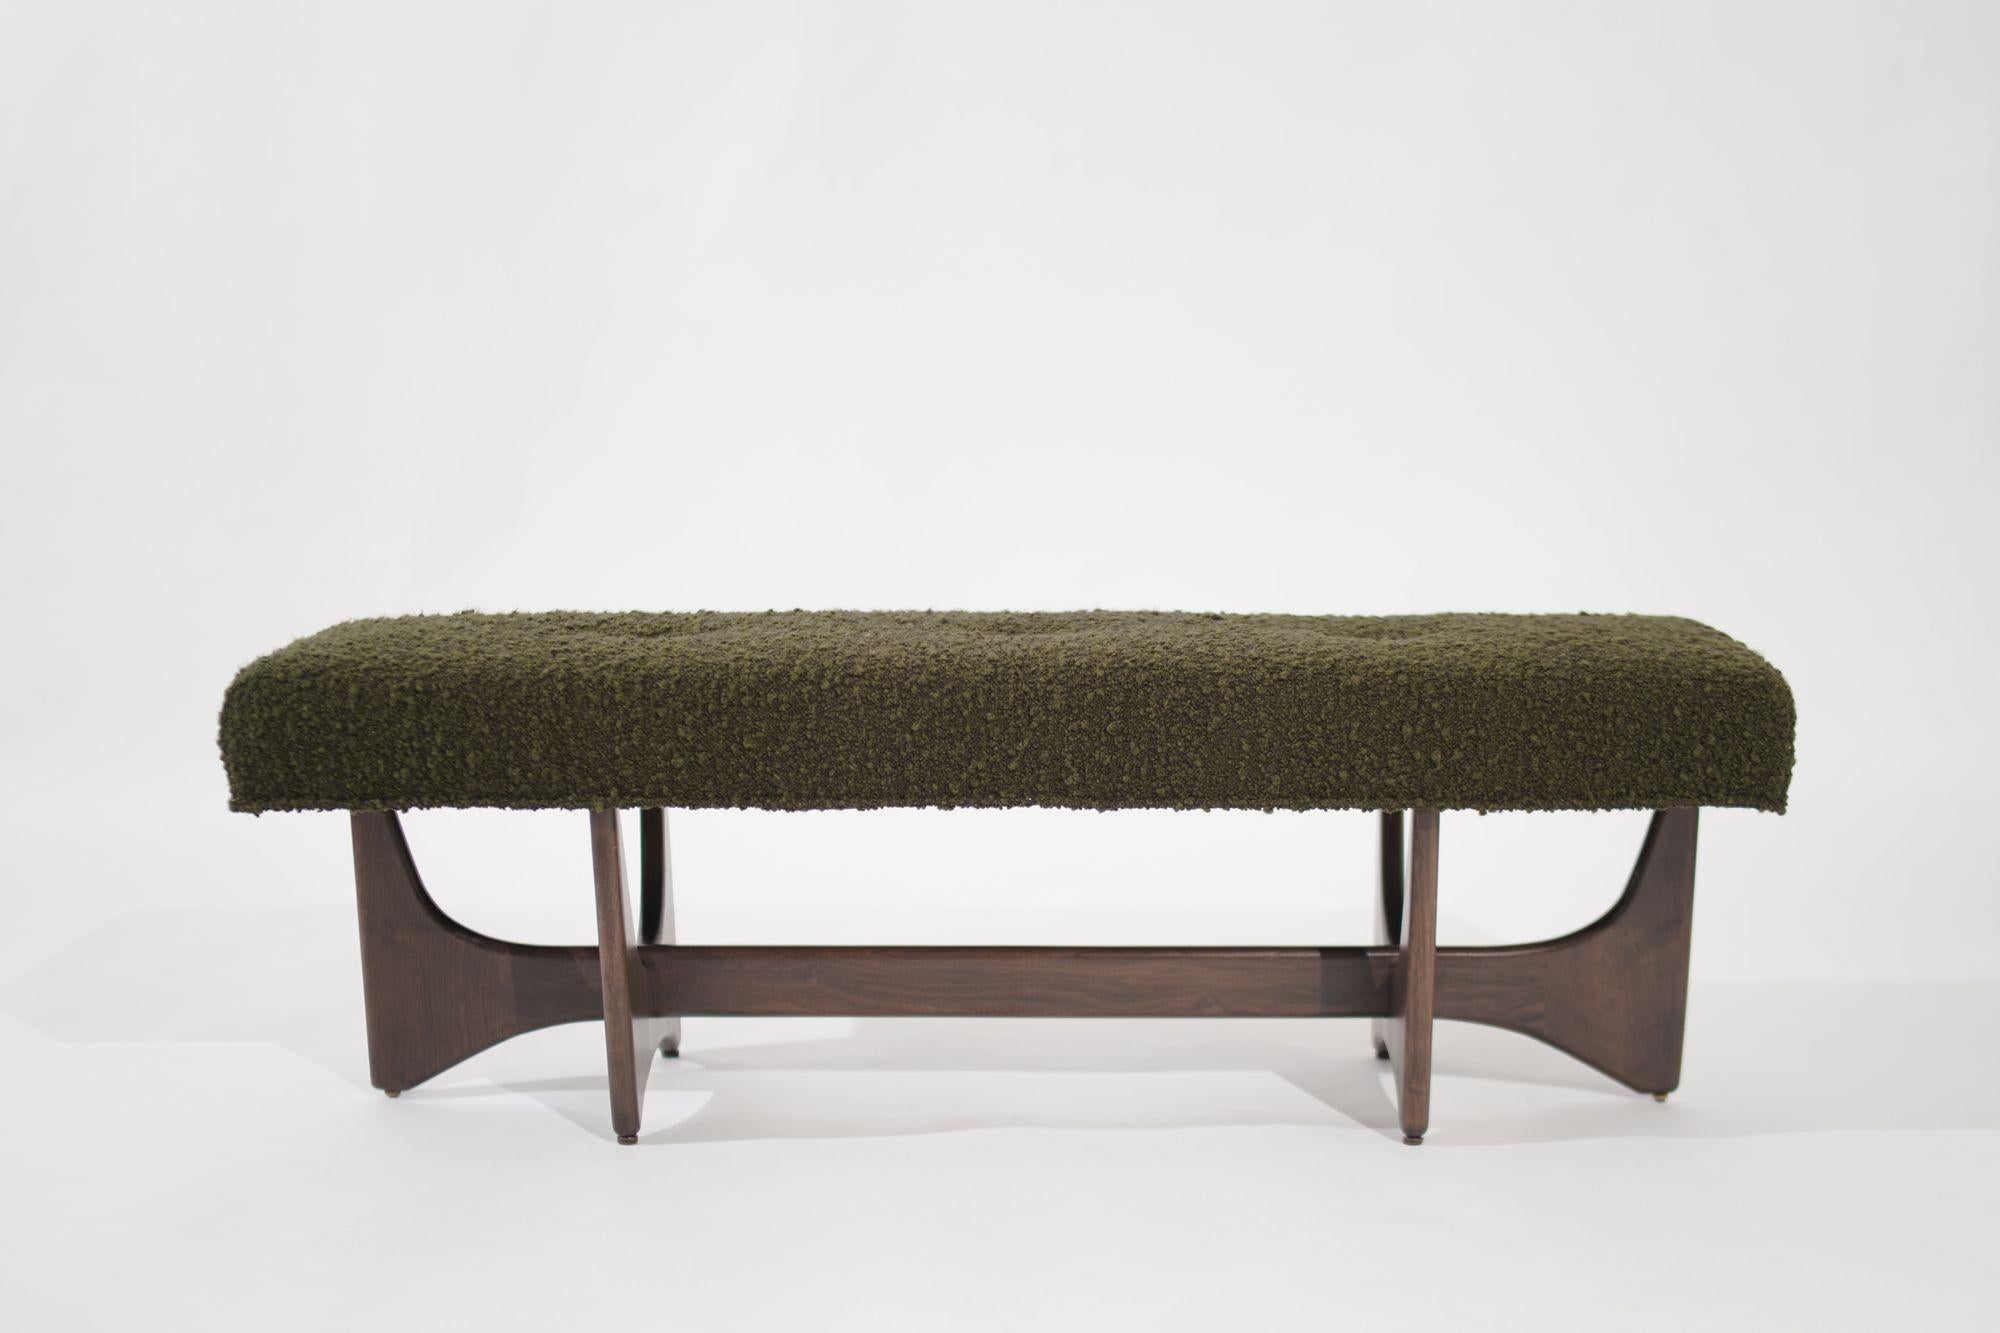 Introducing the Artisanal Bench by Stamford Modern, a captivating sculptural masterpiece that seamlessly blends artistry and functionality. Handcrafted from exquisite solid walnut, this bench elevates any space with its organic shapes and